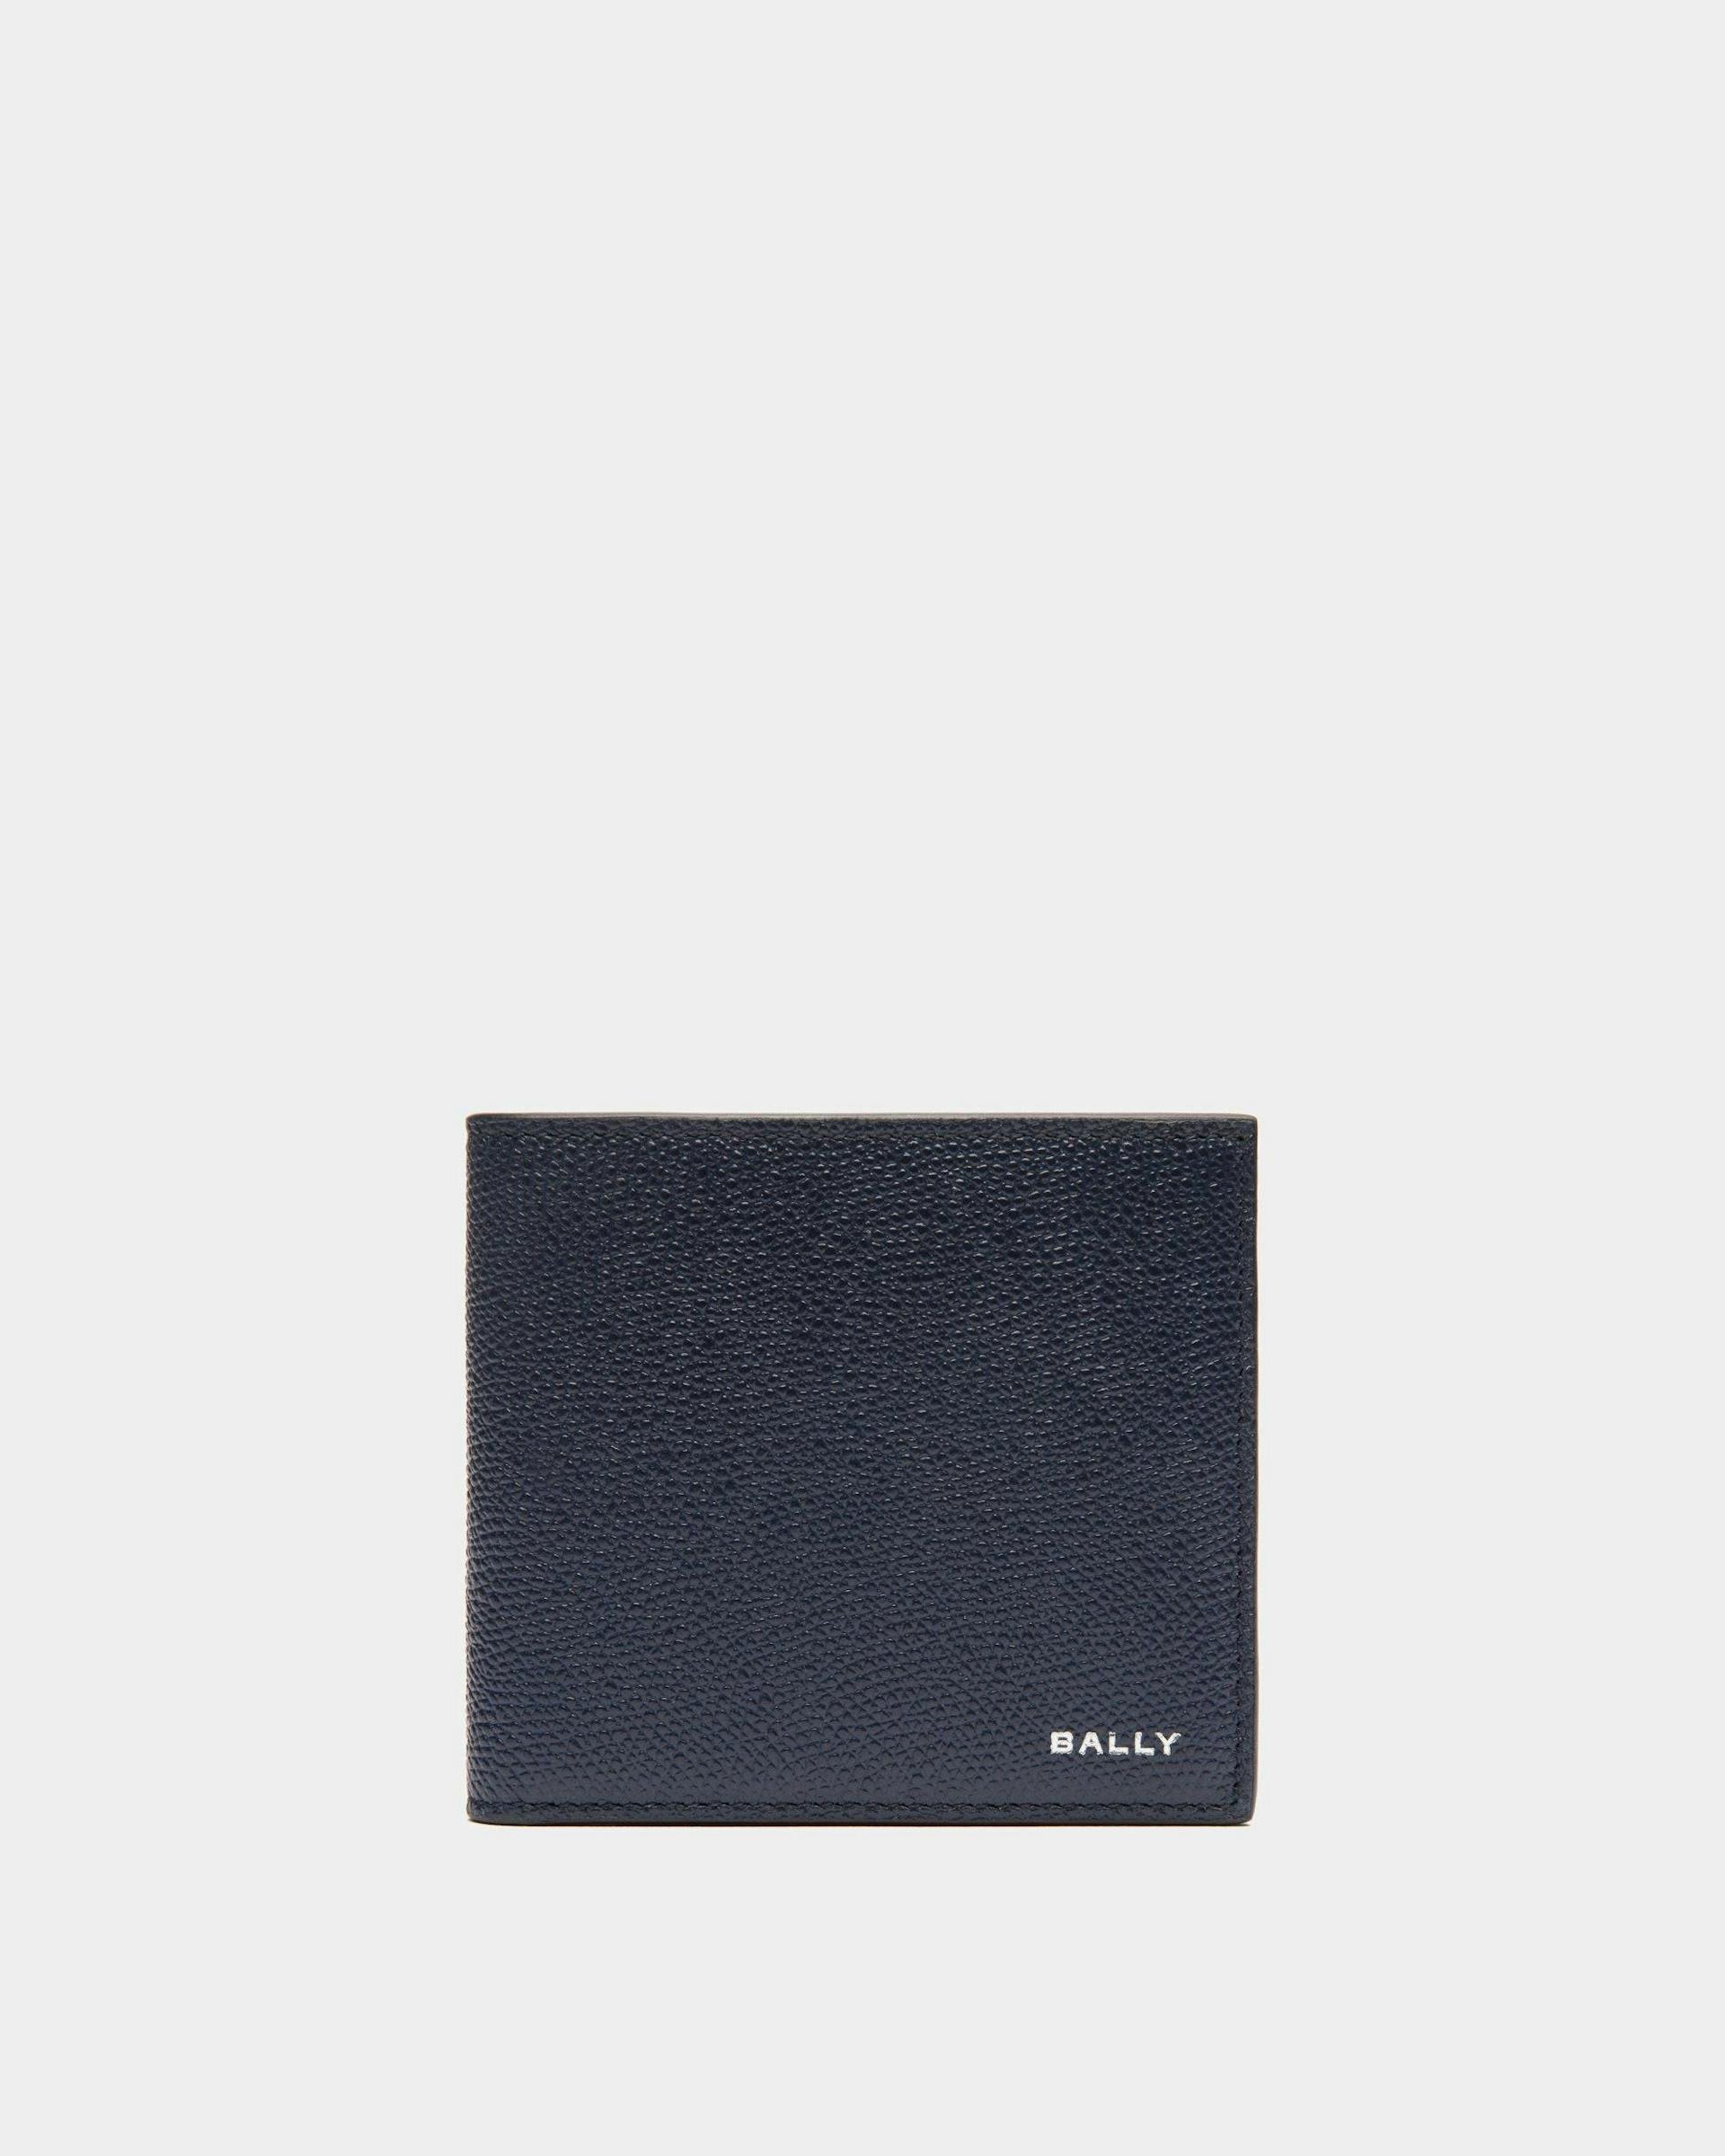 Men's Flag Bifold Wallet in Blue Leather | Bally | Still Life Front